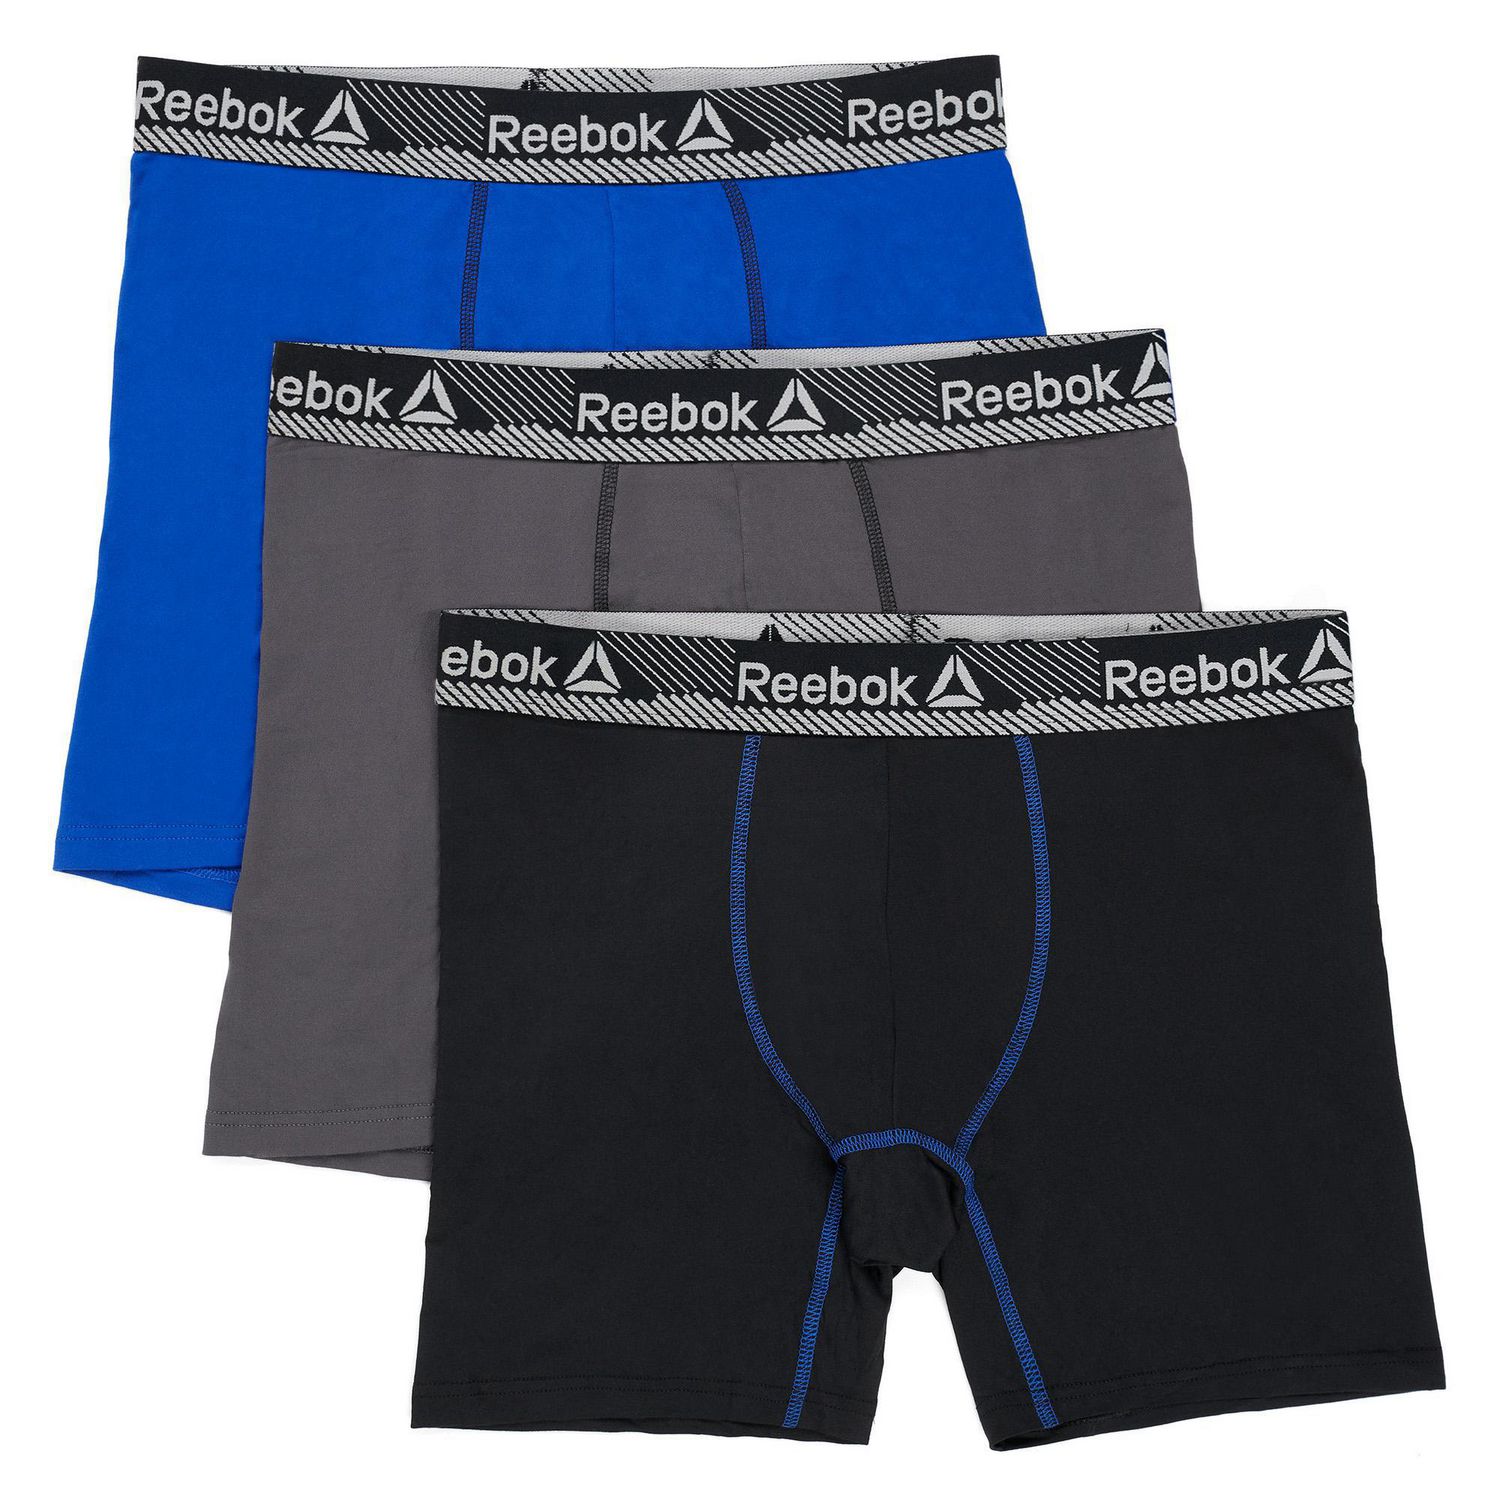 Reebok Mens 4 Pack Performance Boxer Briefs with Comfort Pouch -  Black/Fig/Grey/HTR XX-Large